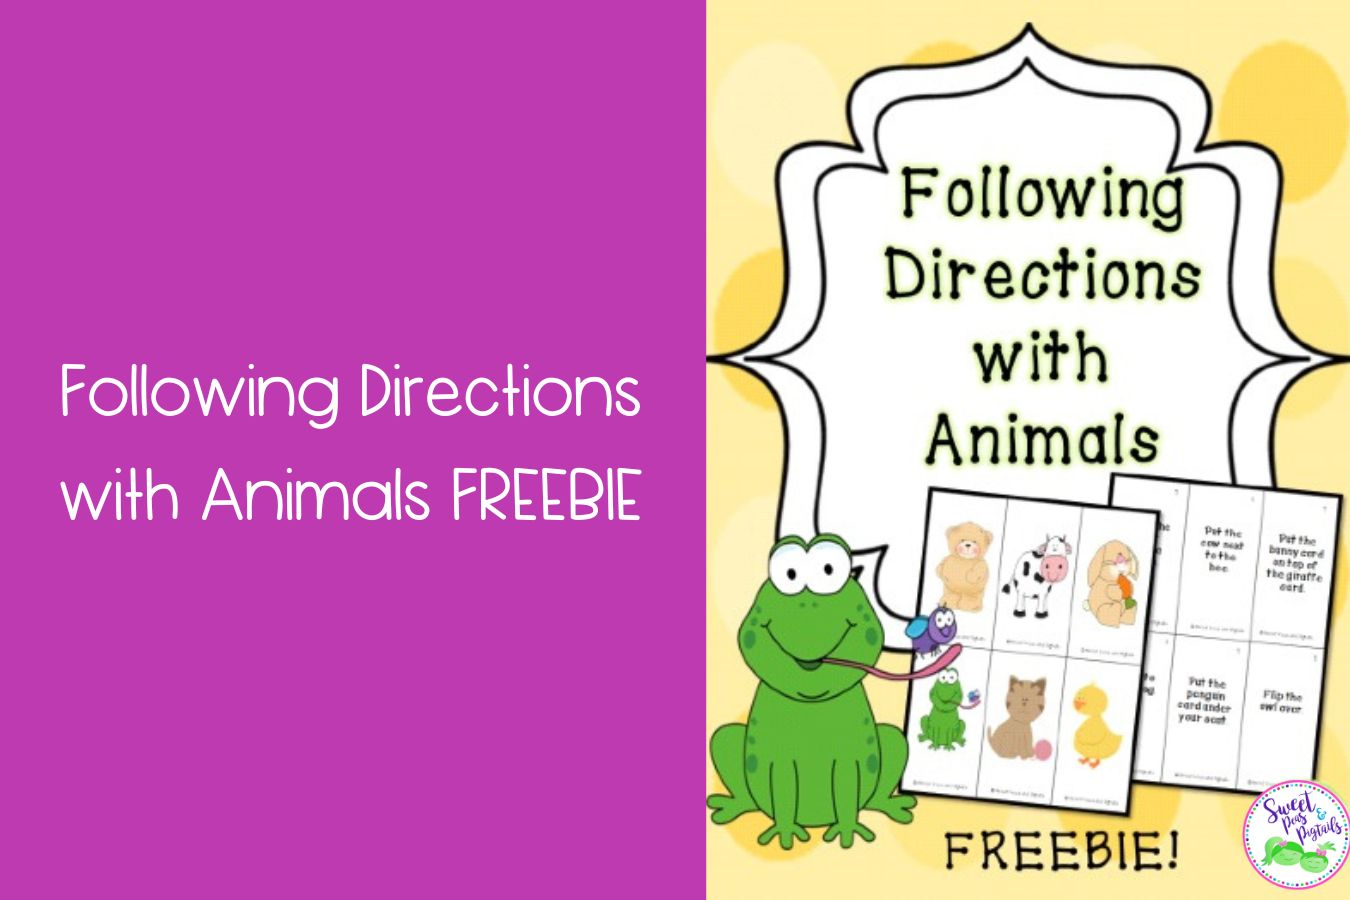 Following Directions with Animals FREEBIE Featured